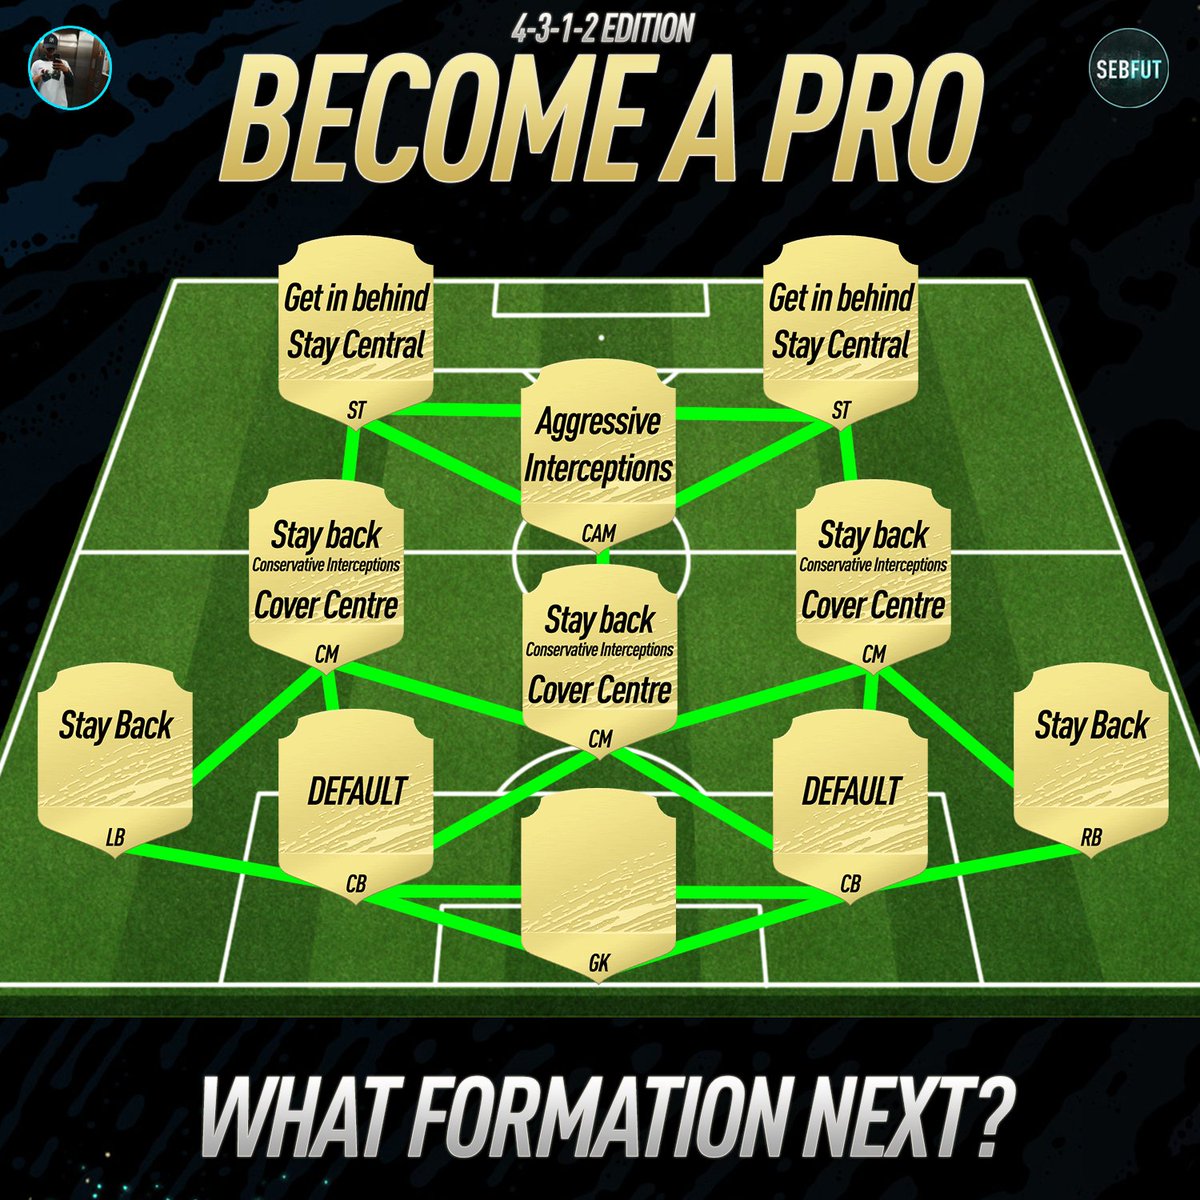 Saf Kaylan You Guys Asked For It So Here It Is 4312 Custom Tactics And Instructions Try Them Out And Let Me Know How It Is Collab With Sebfut